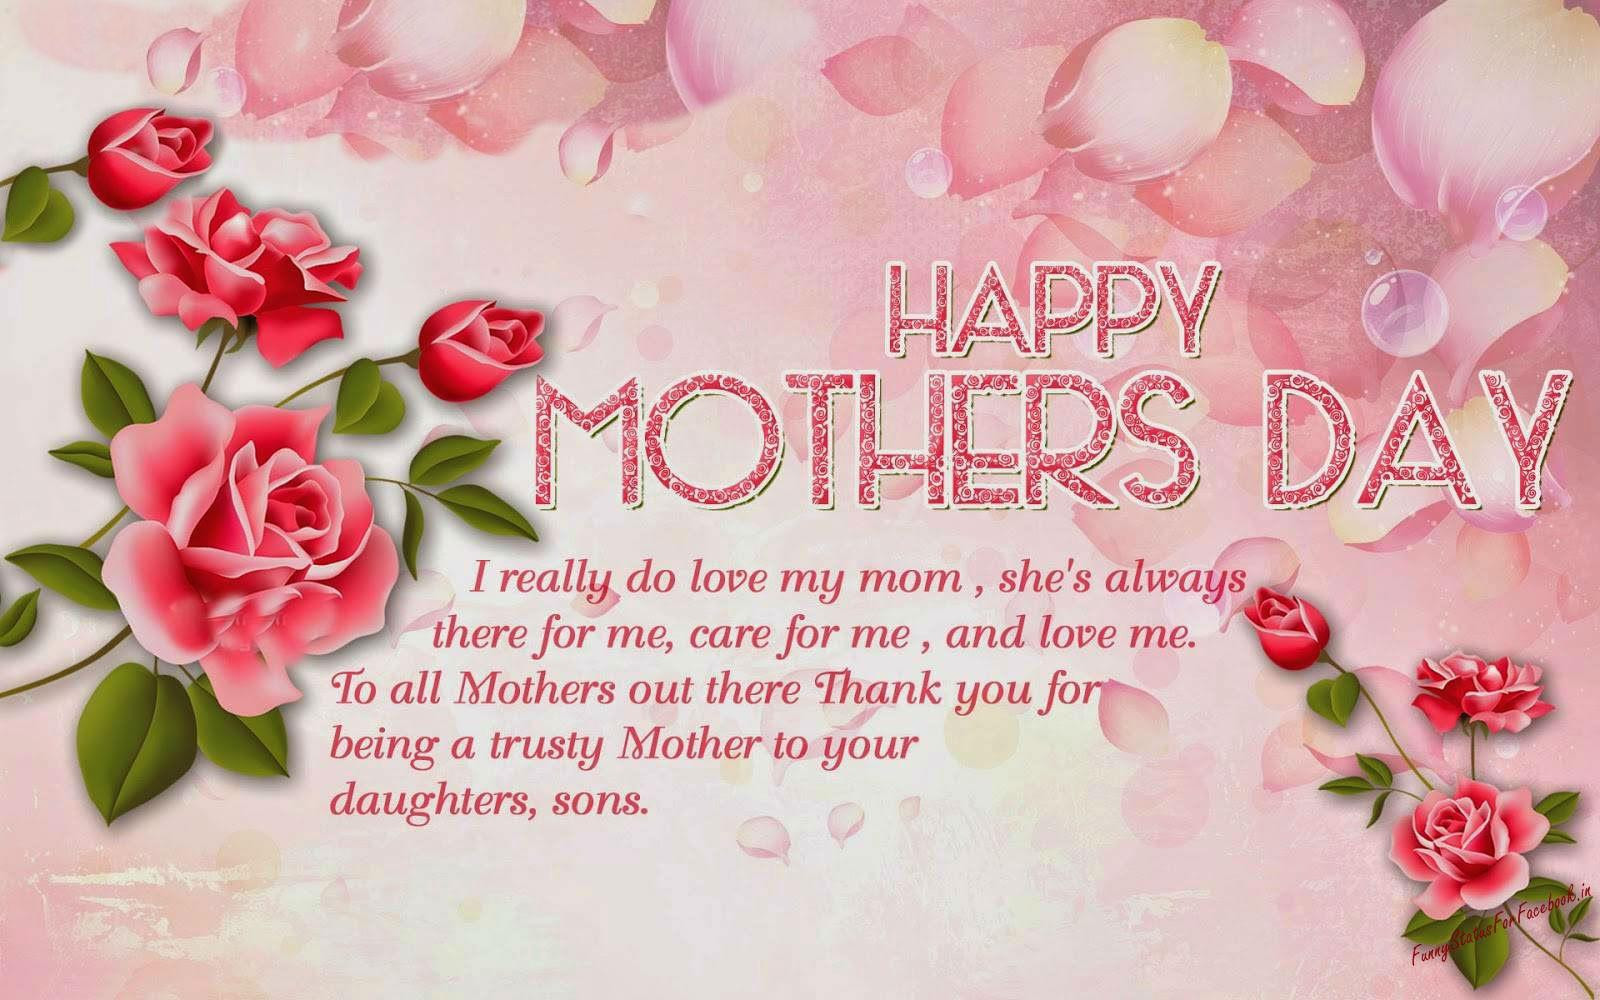 Best Friend Mother Day Quotes
 Happy Mother s Day Quotes for my best Friend